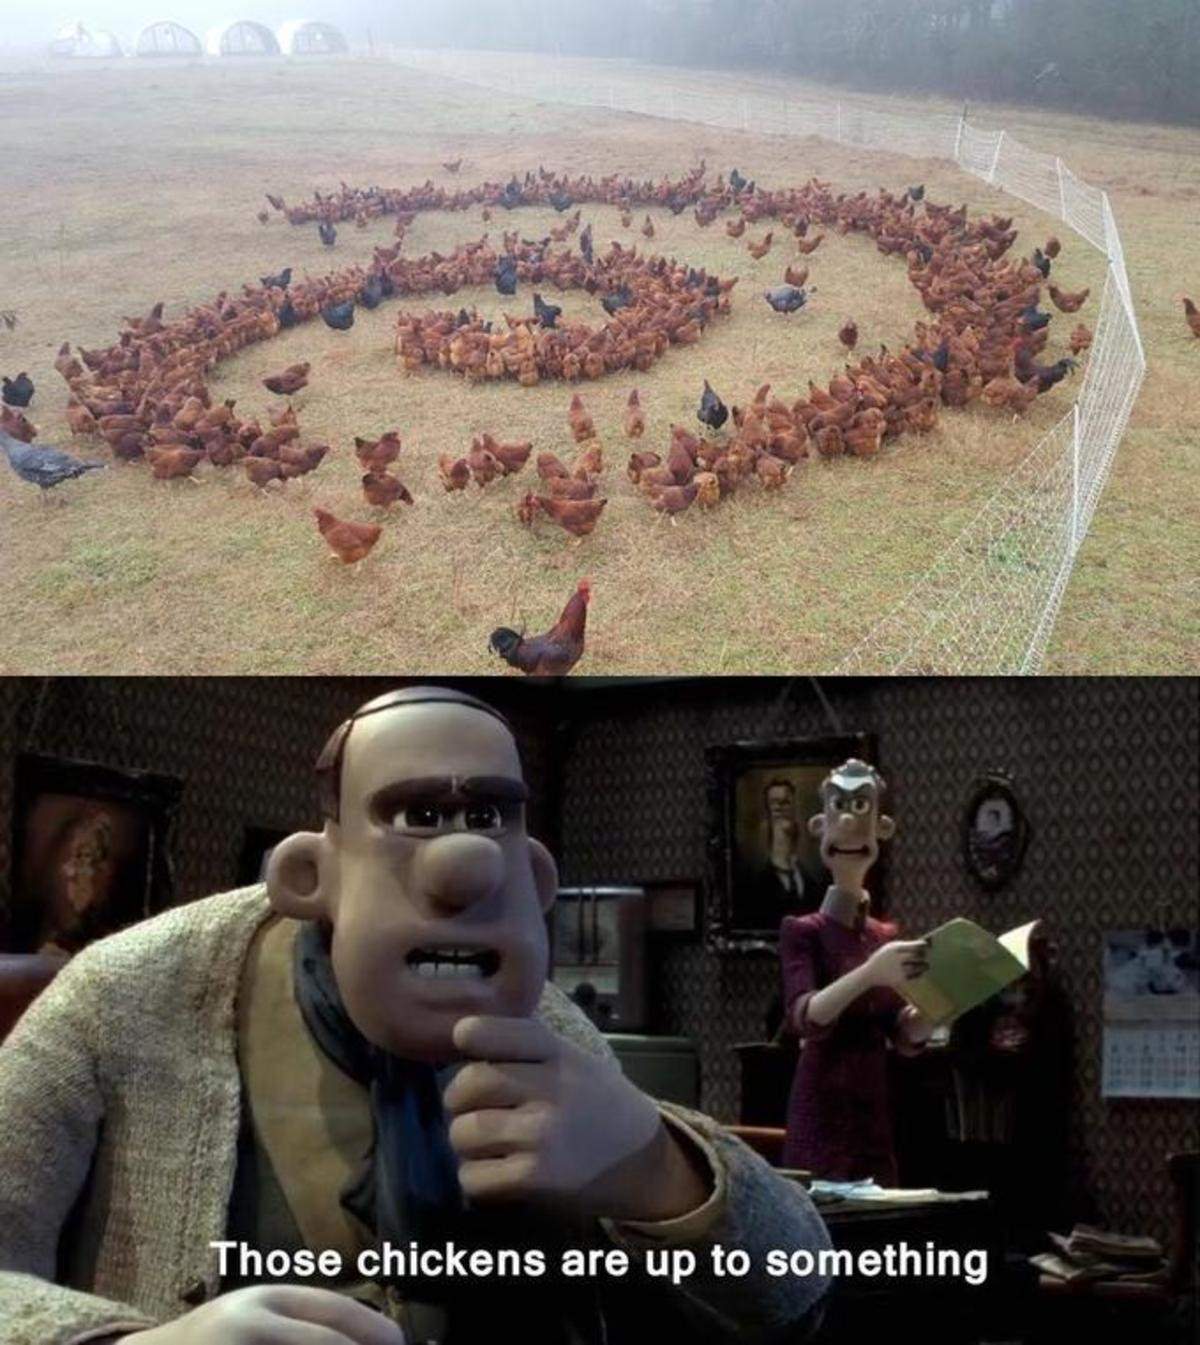 memes - those are up to something - Those chickens are up to something